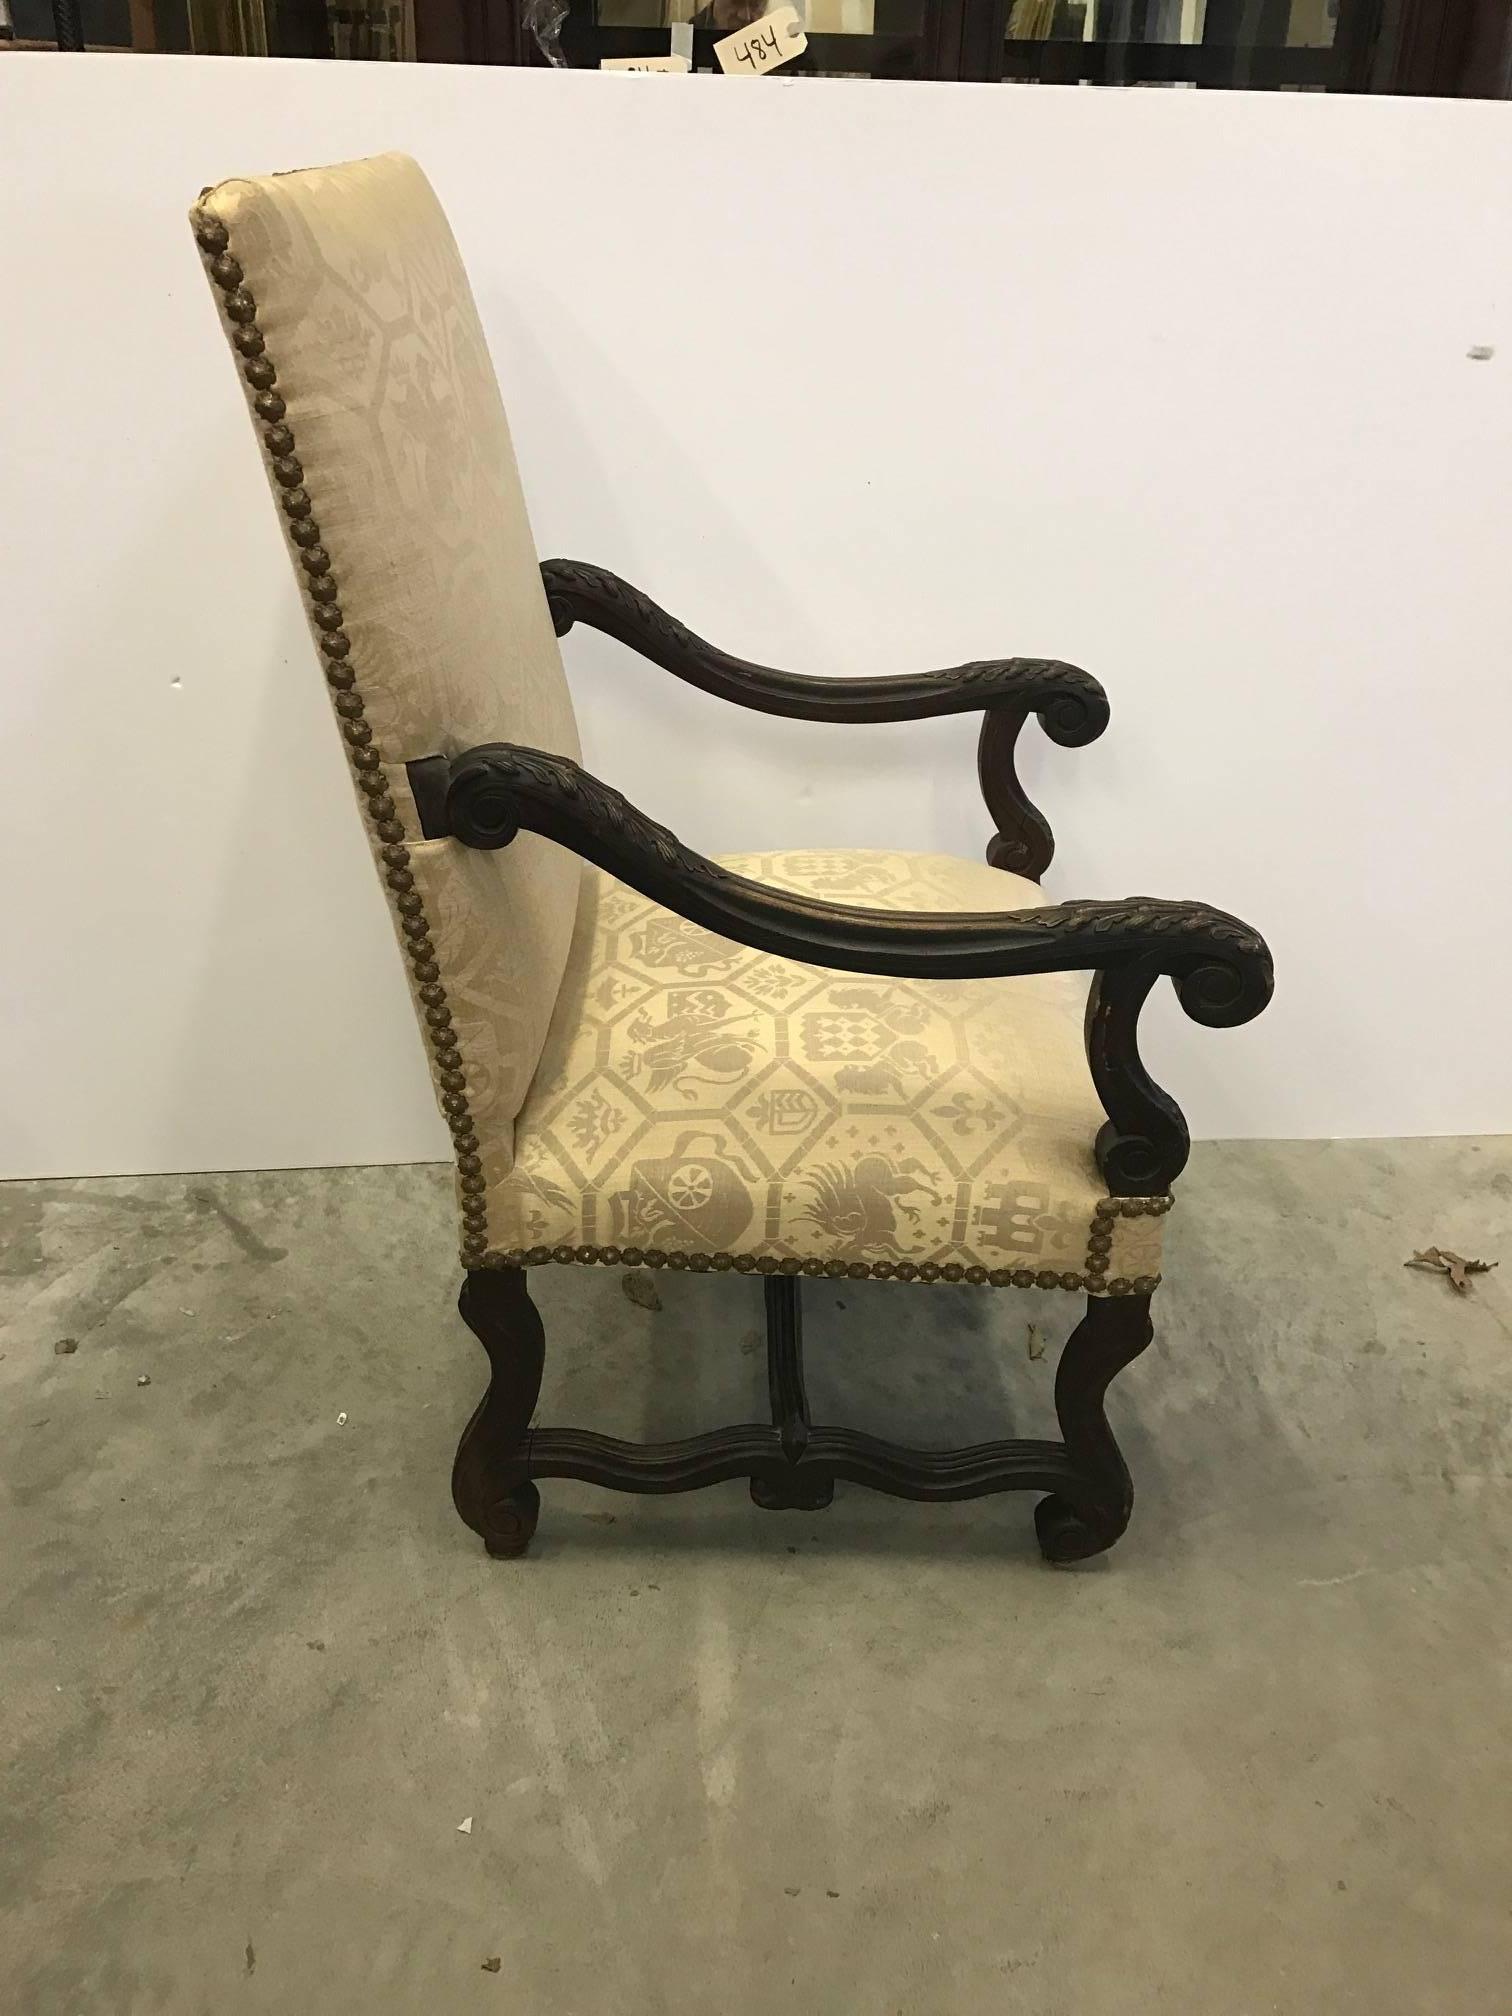 Hand-carved English library chair. Long sloping arms with acanthus leaf carving. New soft yellow damask upholstery.